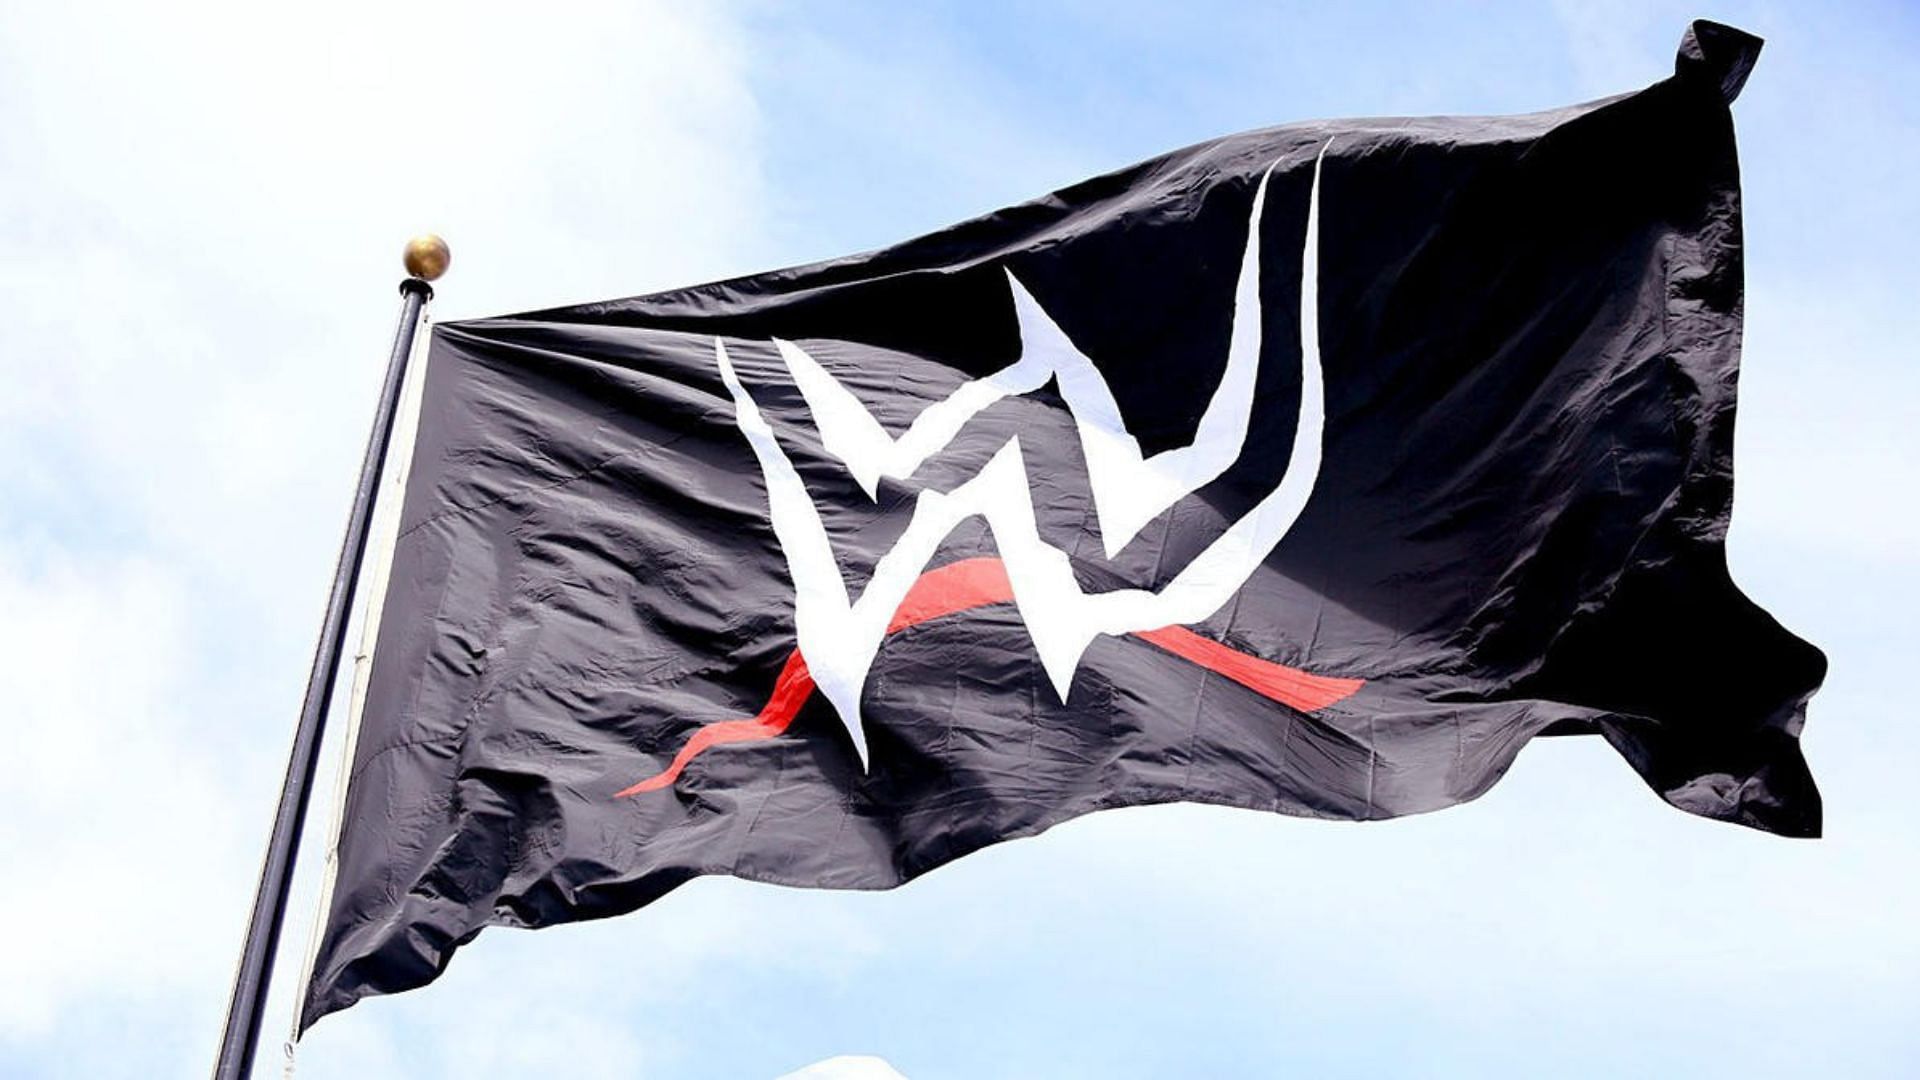 WWE is a Stamford-based wrestling promotion at the top of the industry today [Photo courtesy of WWE